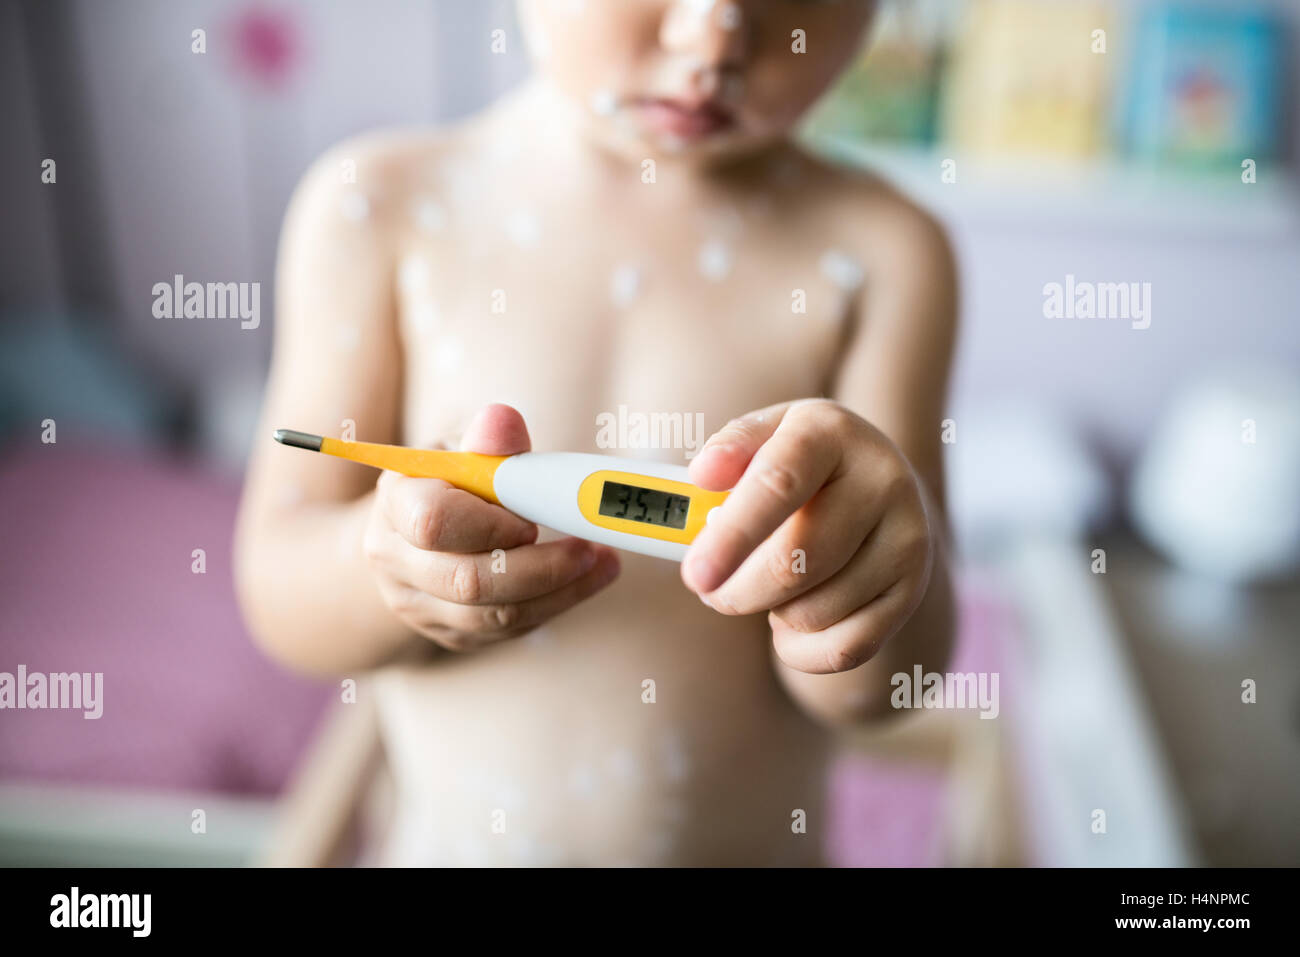 Unrecognizable little girl with chickenpox, holding thermometer Stock Photo